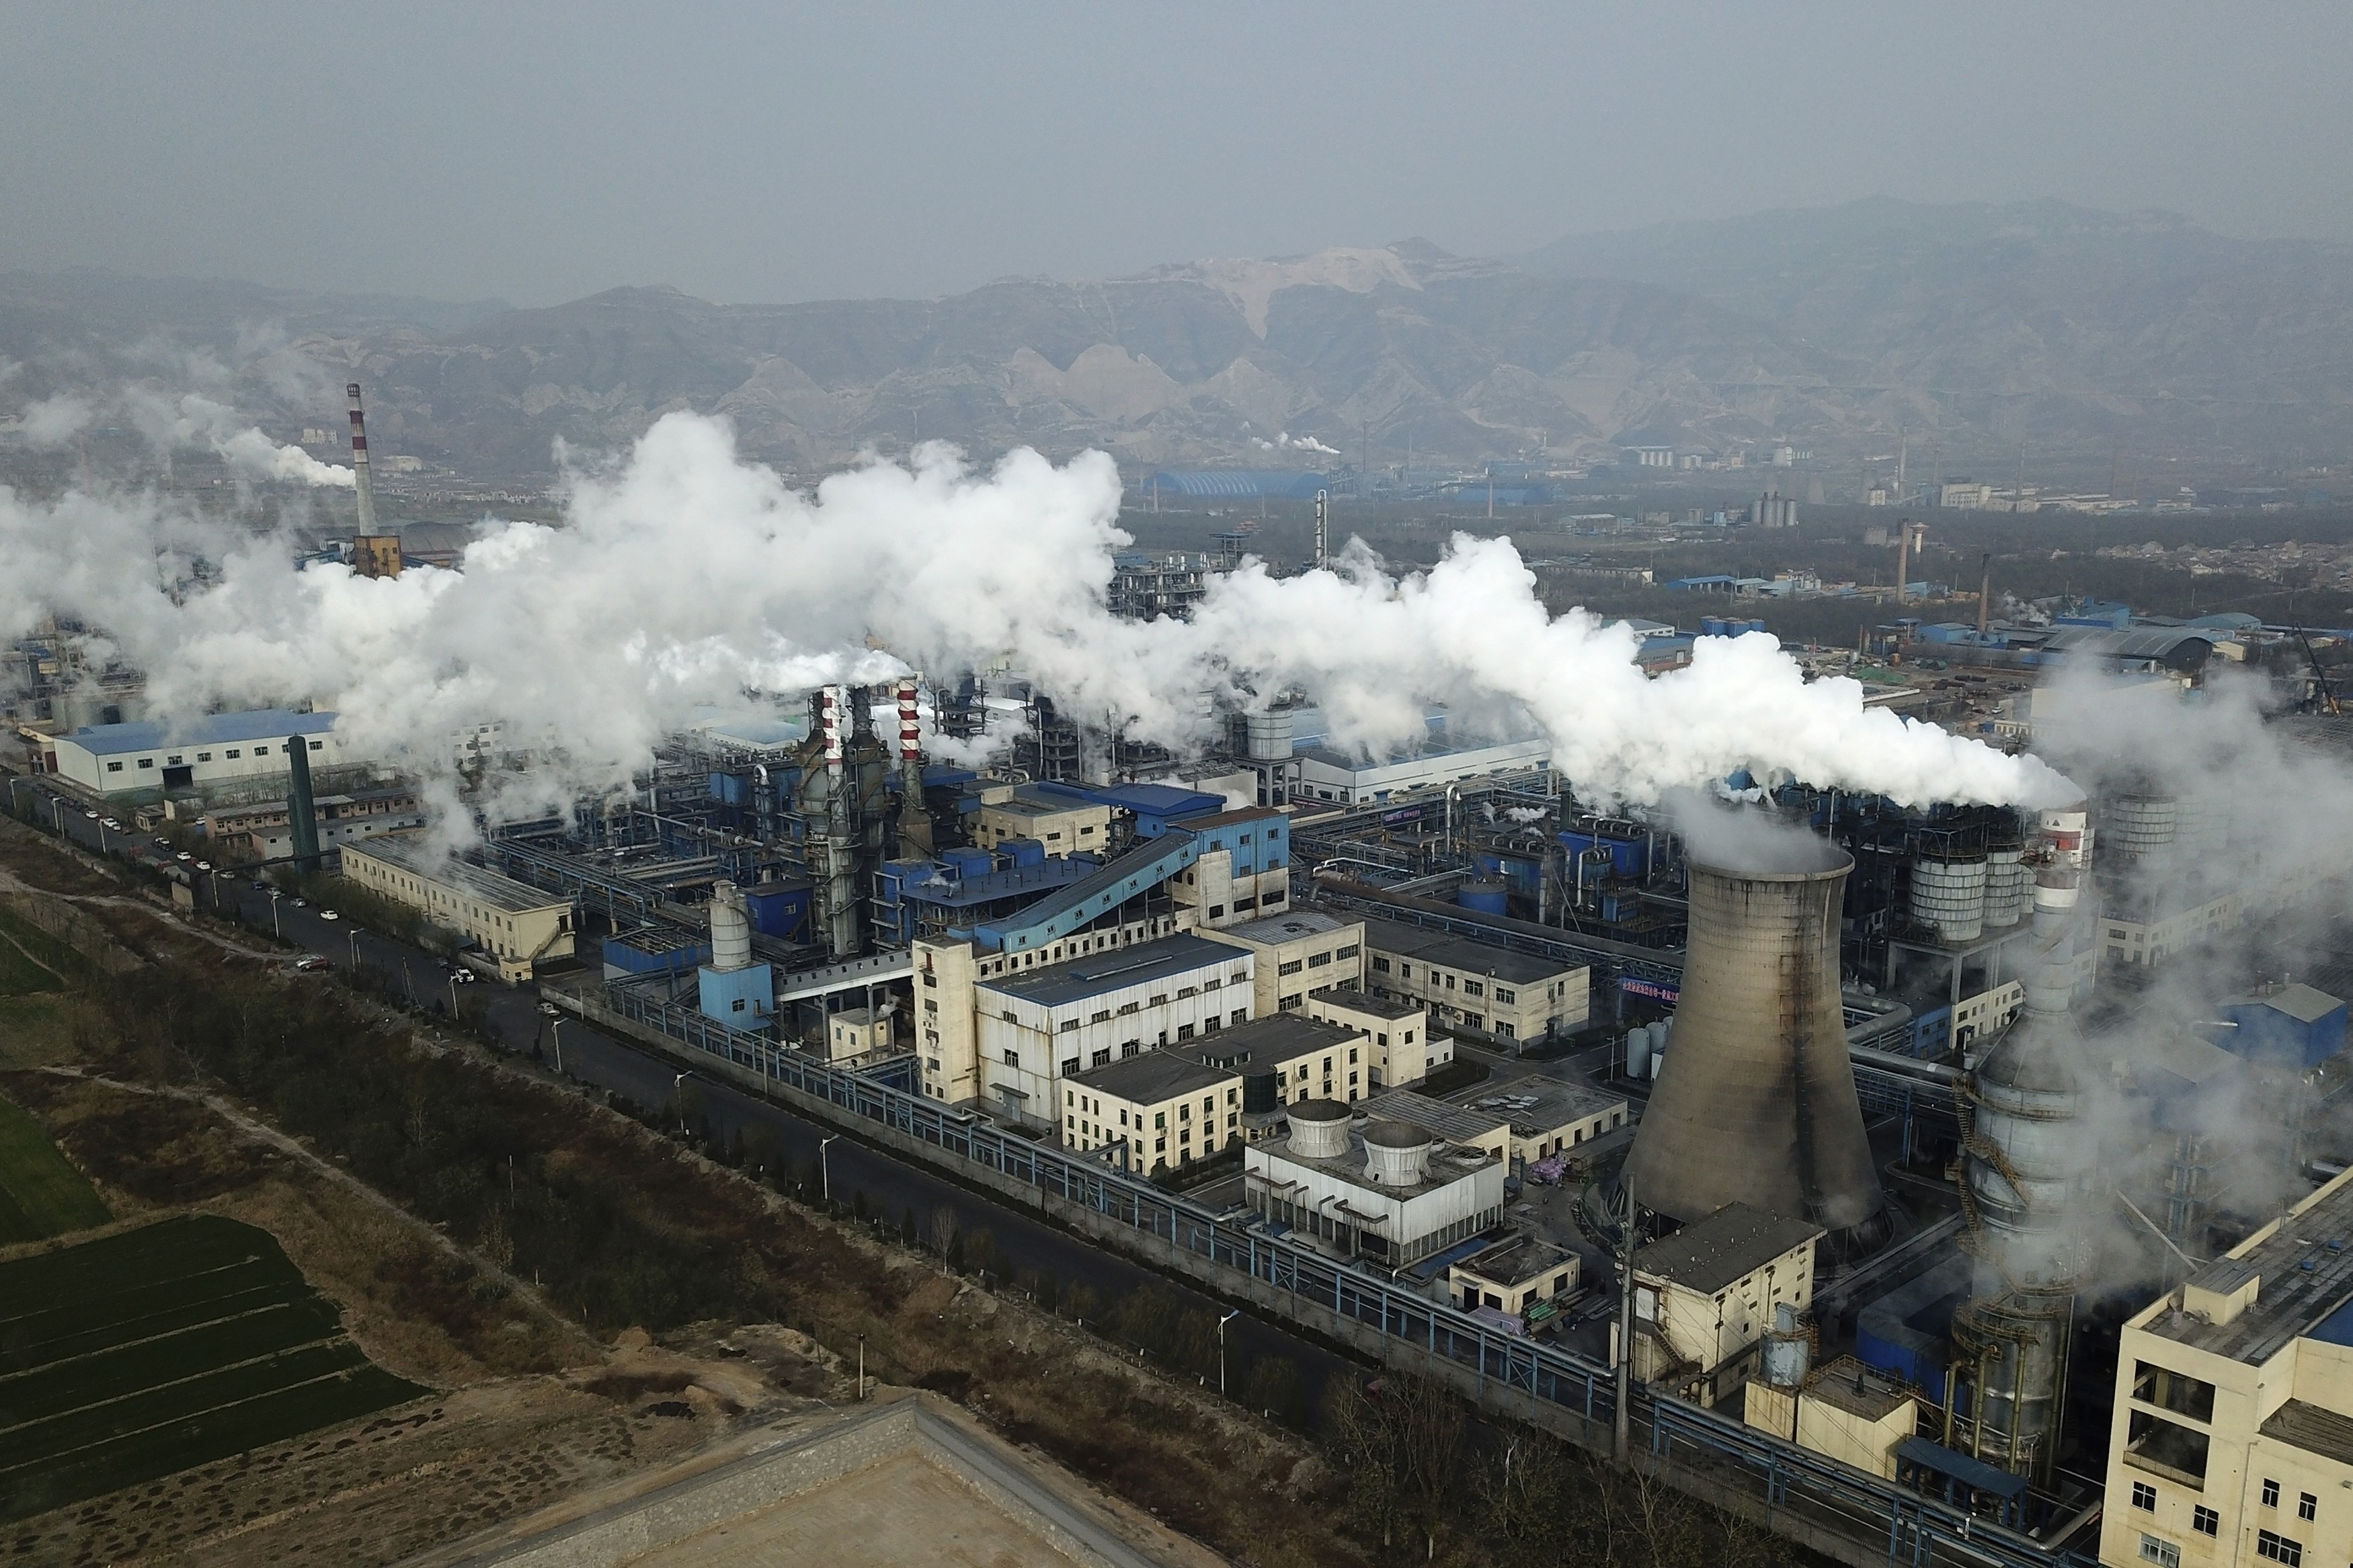 Carbon costs need to be priced at a level that more appropriately reflects the damage to the environment caused by high-emitting industries, the WEF heard. Photo: AP